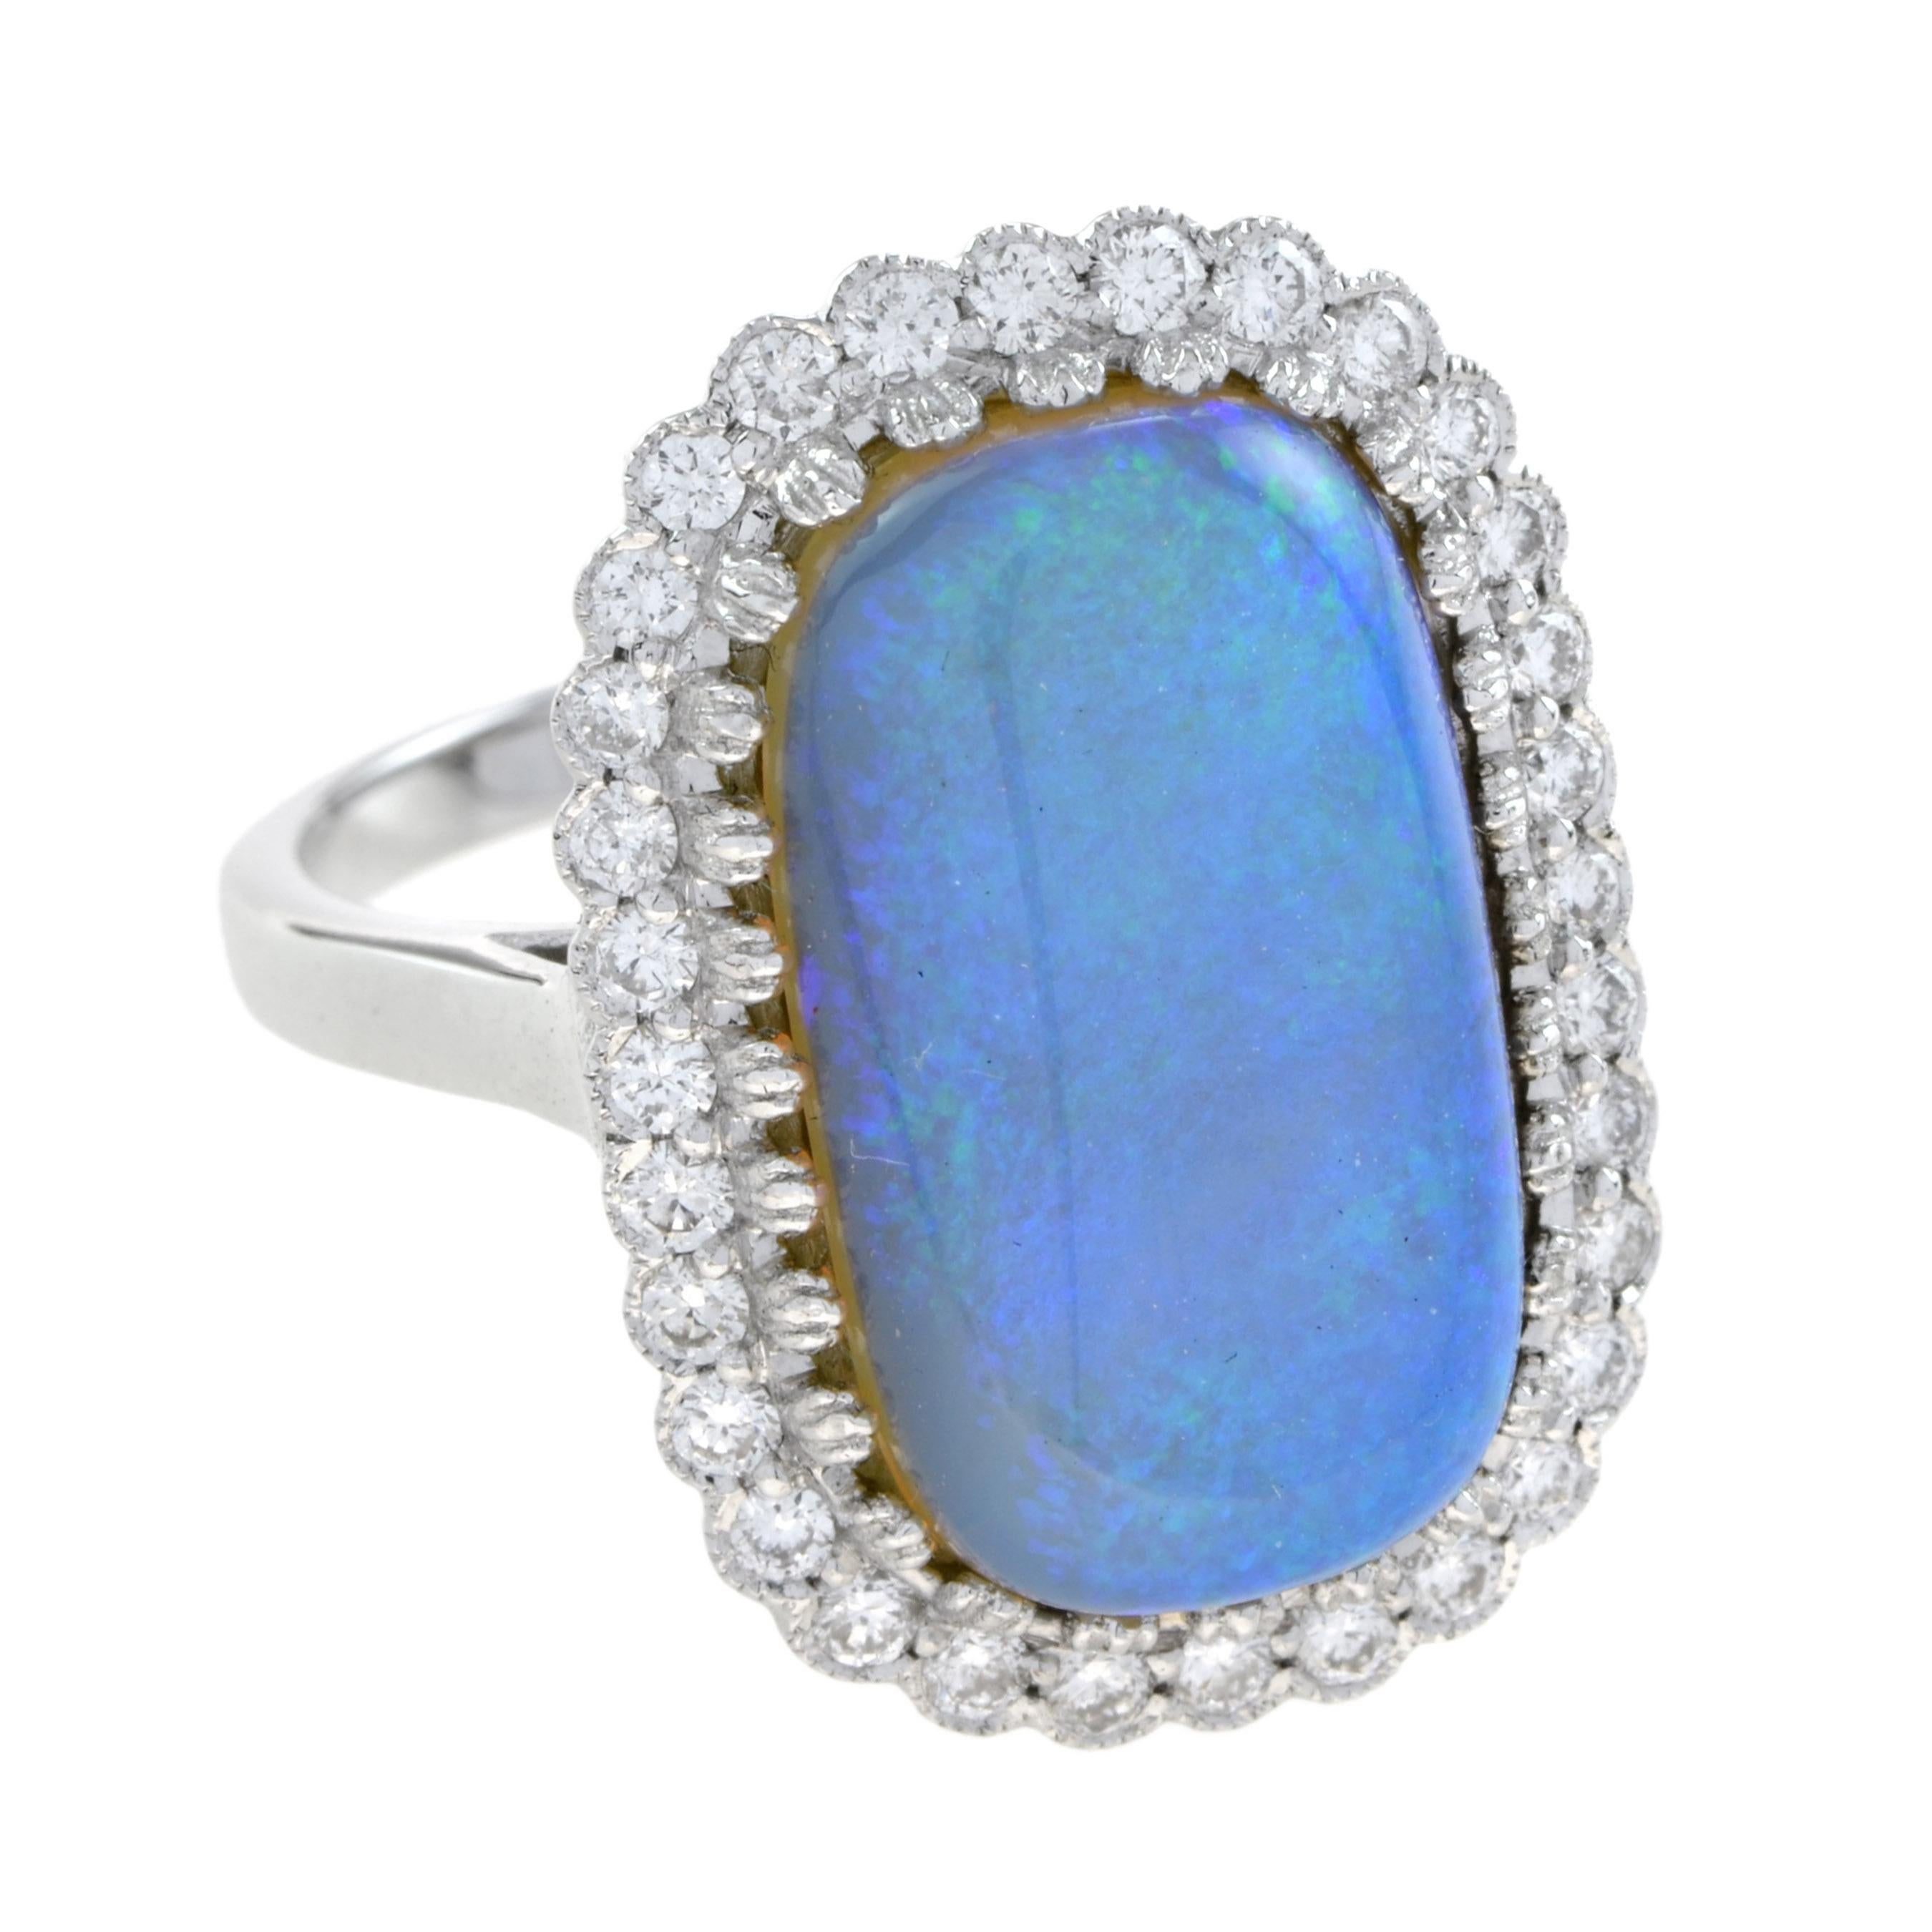 Curate your collection of classic accessories with this gorgeous opal and diamond ring. Fashioned in 18k white gold, this sublime look showcases a 5.20 carat crystal Australian cushion-shaped opal cabochon. The frame sparkles with H/SI grade